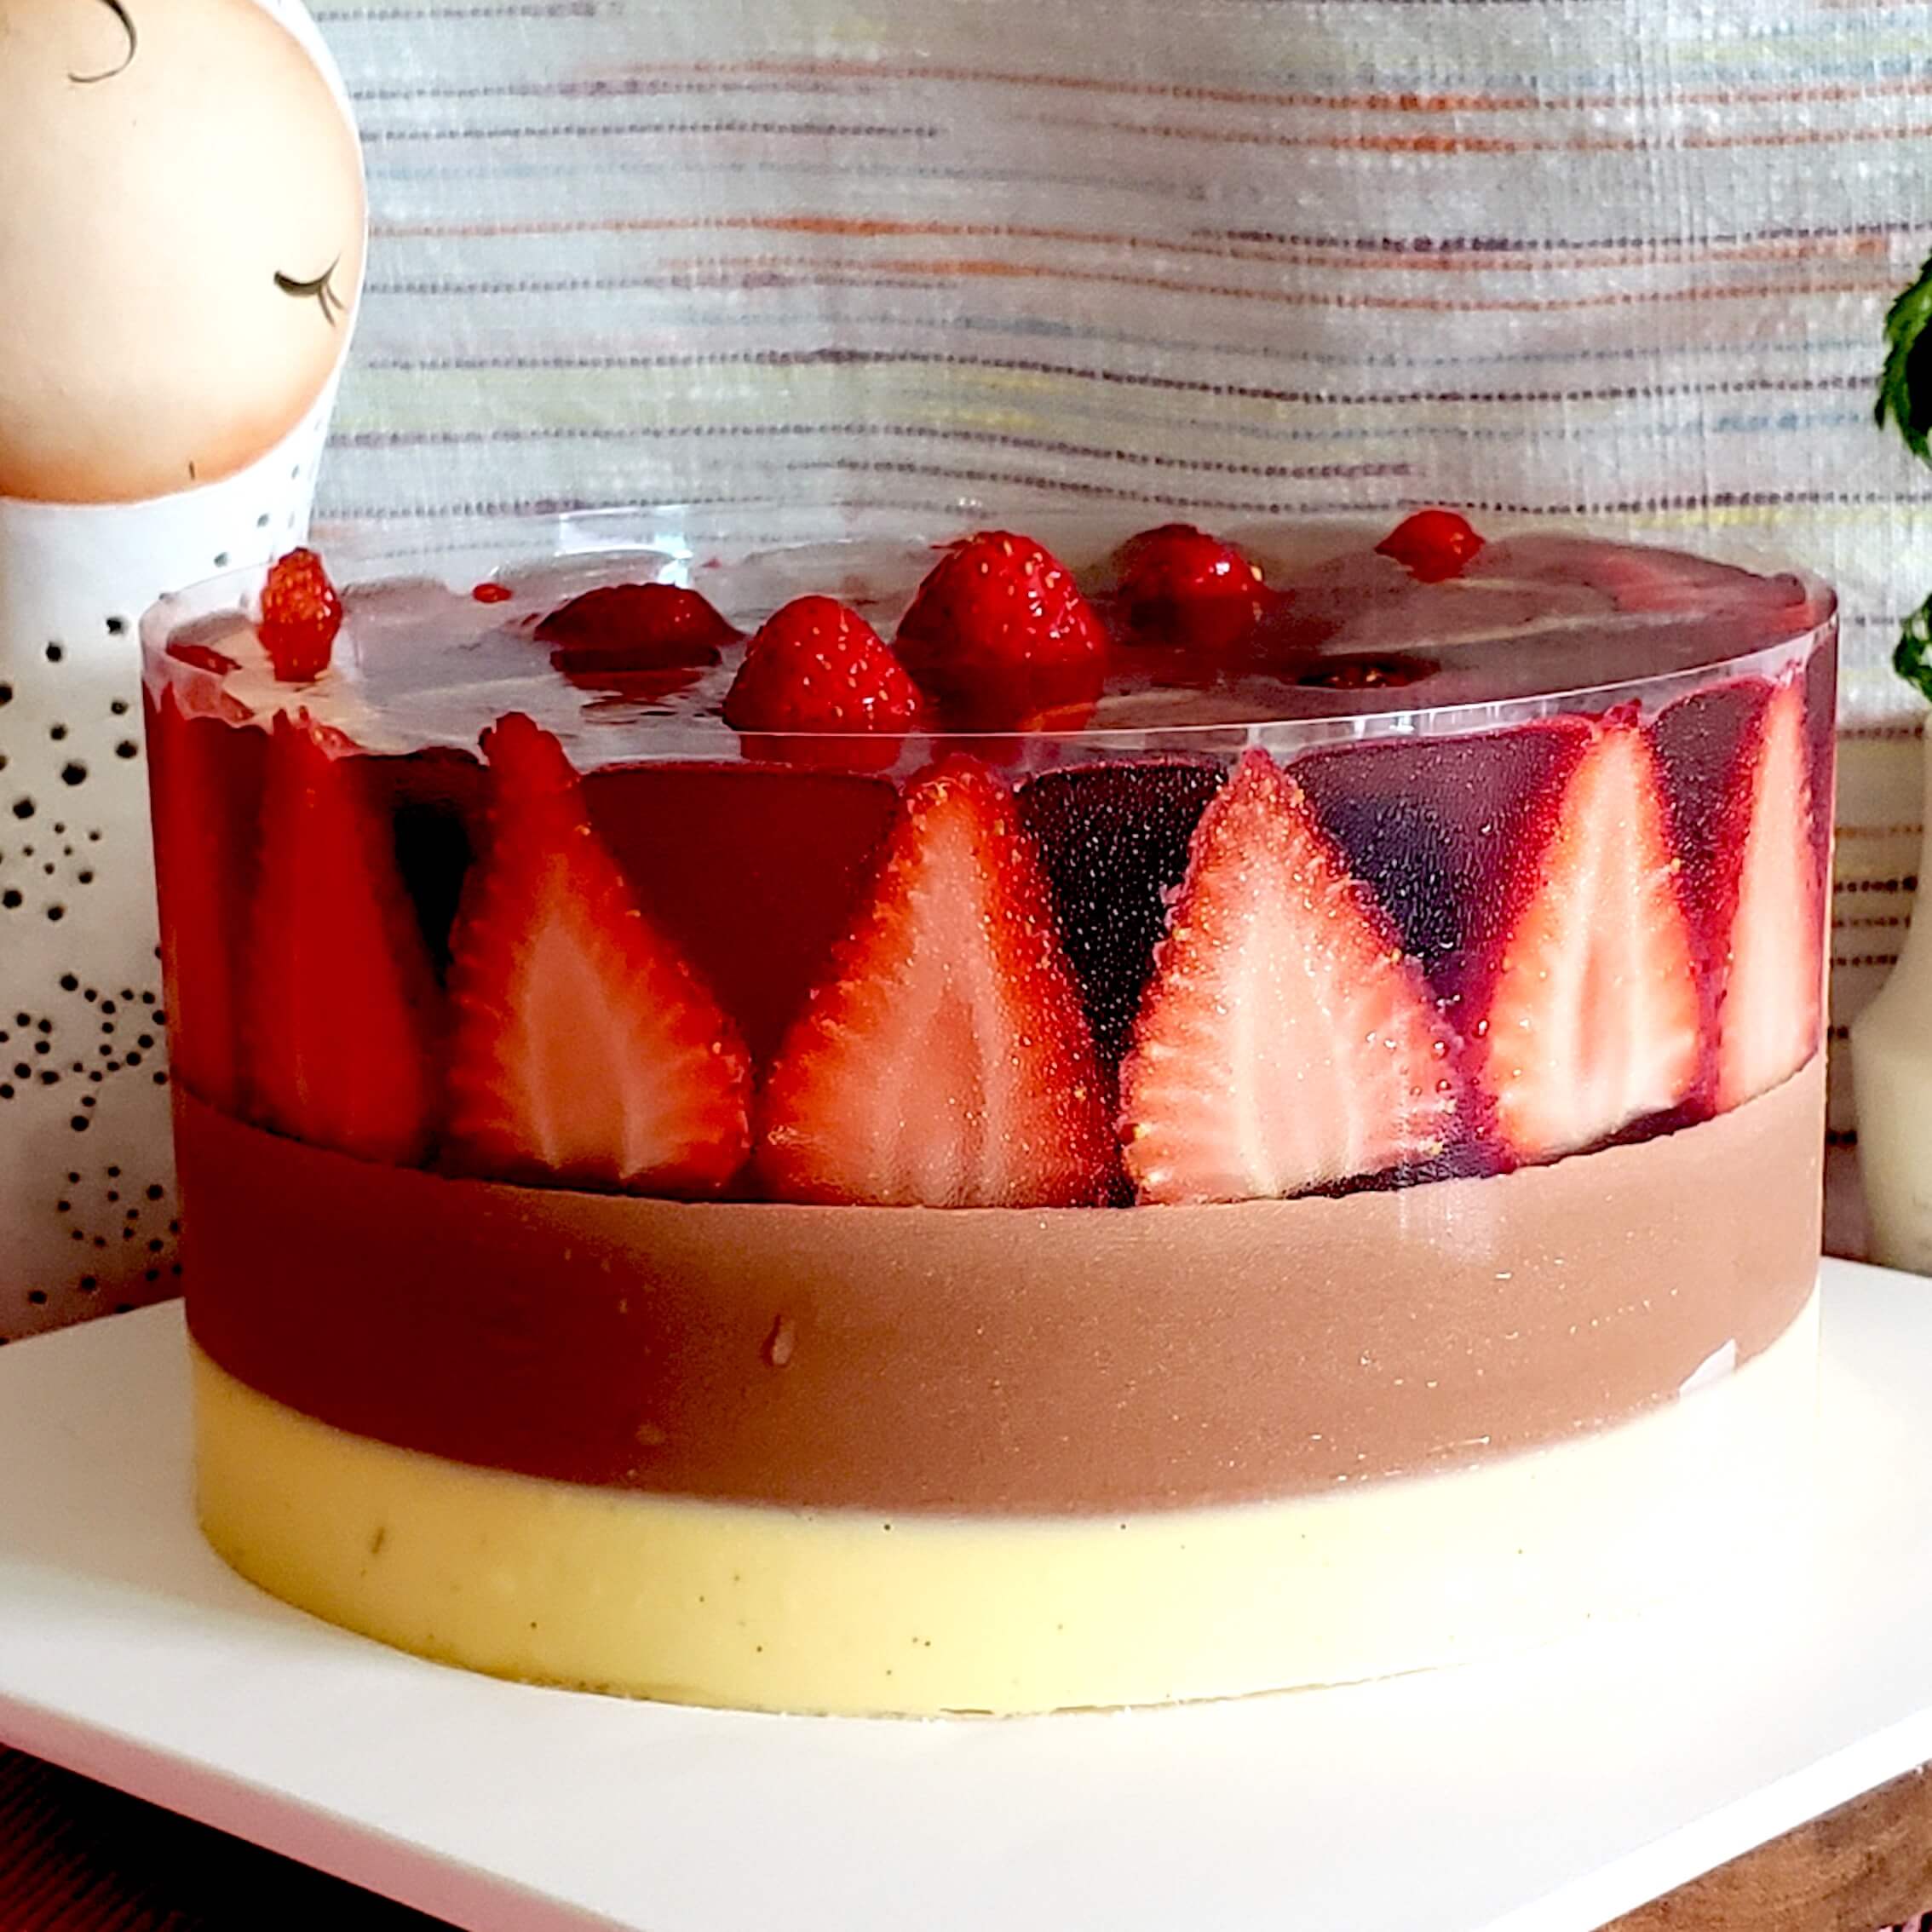 Chocolate Vanilla Mousse cake with Strawberry Jelly